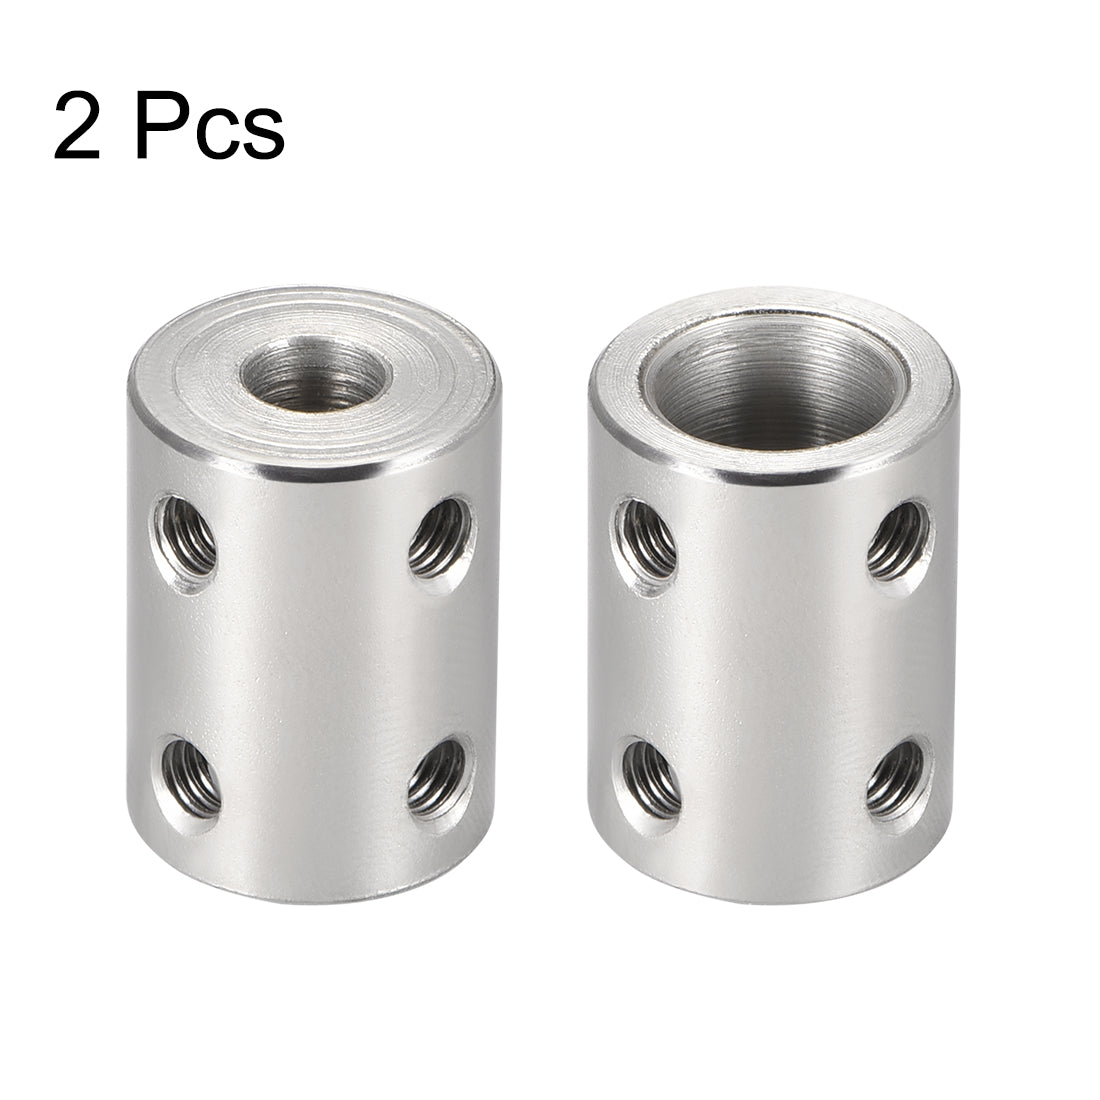 uxcell Uxcell Shaft Coupling 6mm to 10mm L22xD16 Robot Motor Wheel Rigid Coupler Connector Silver Tone 2 PCS